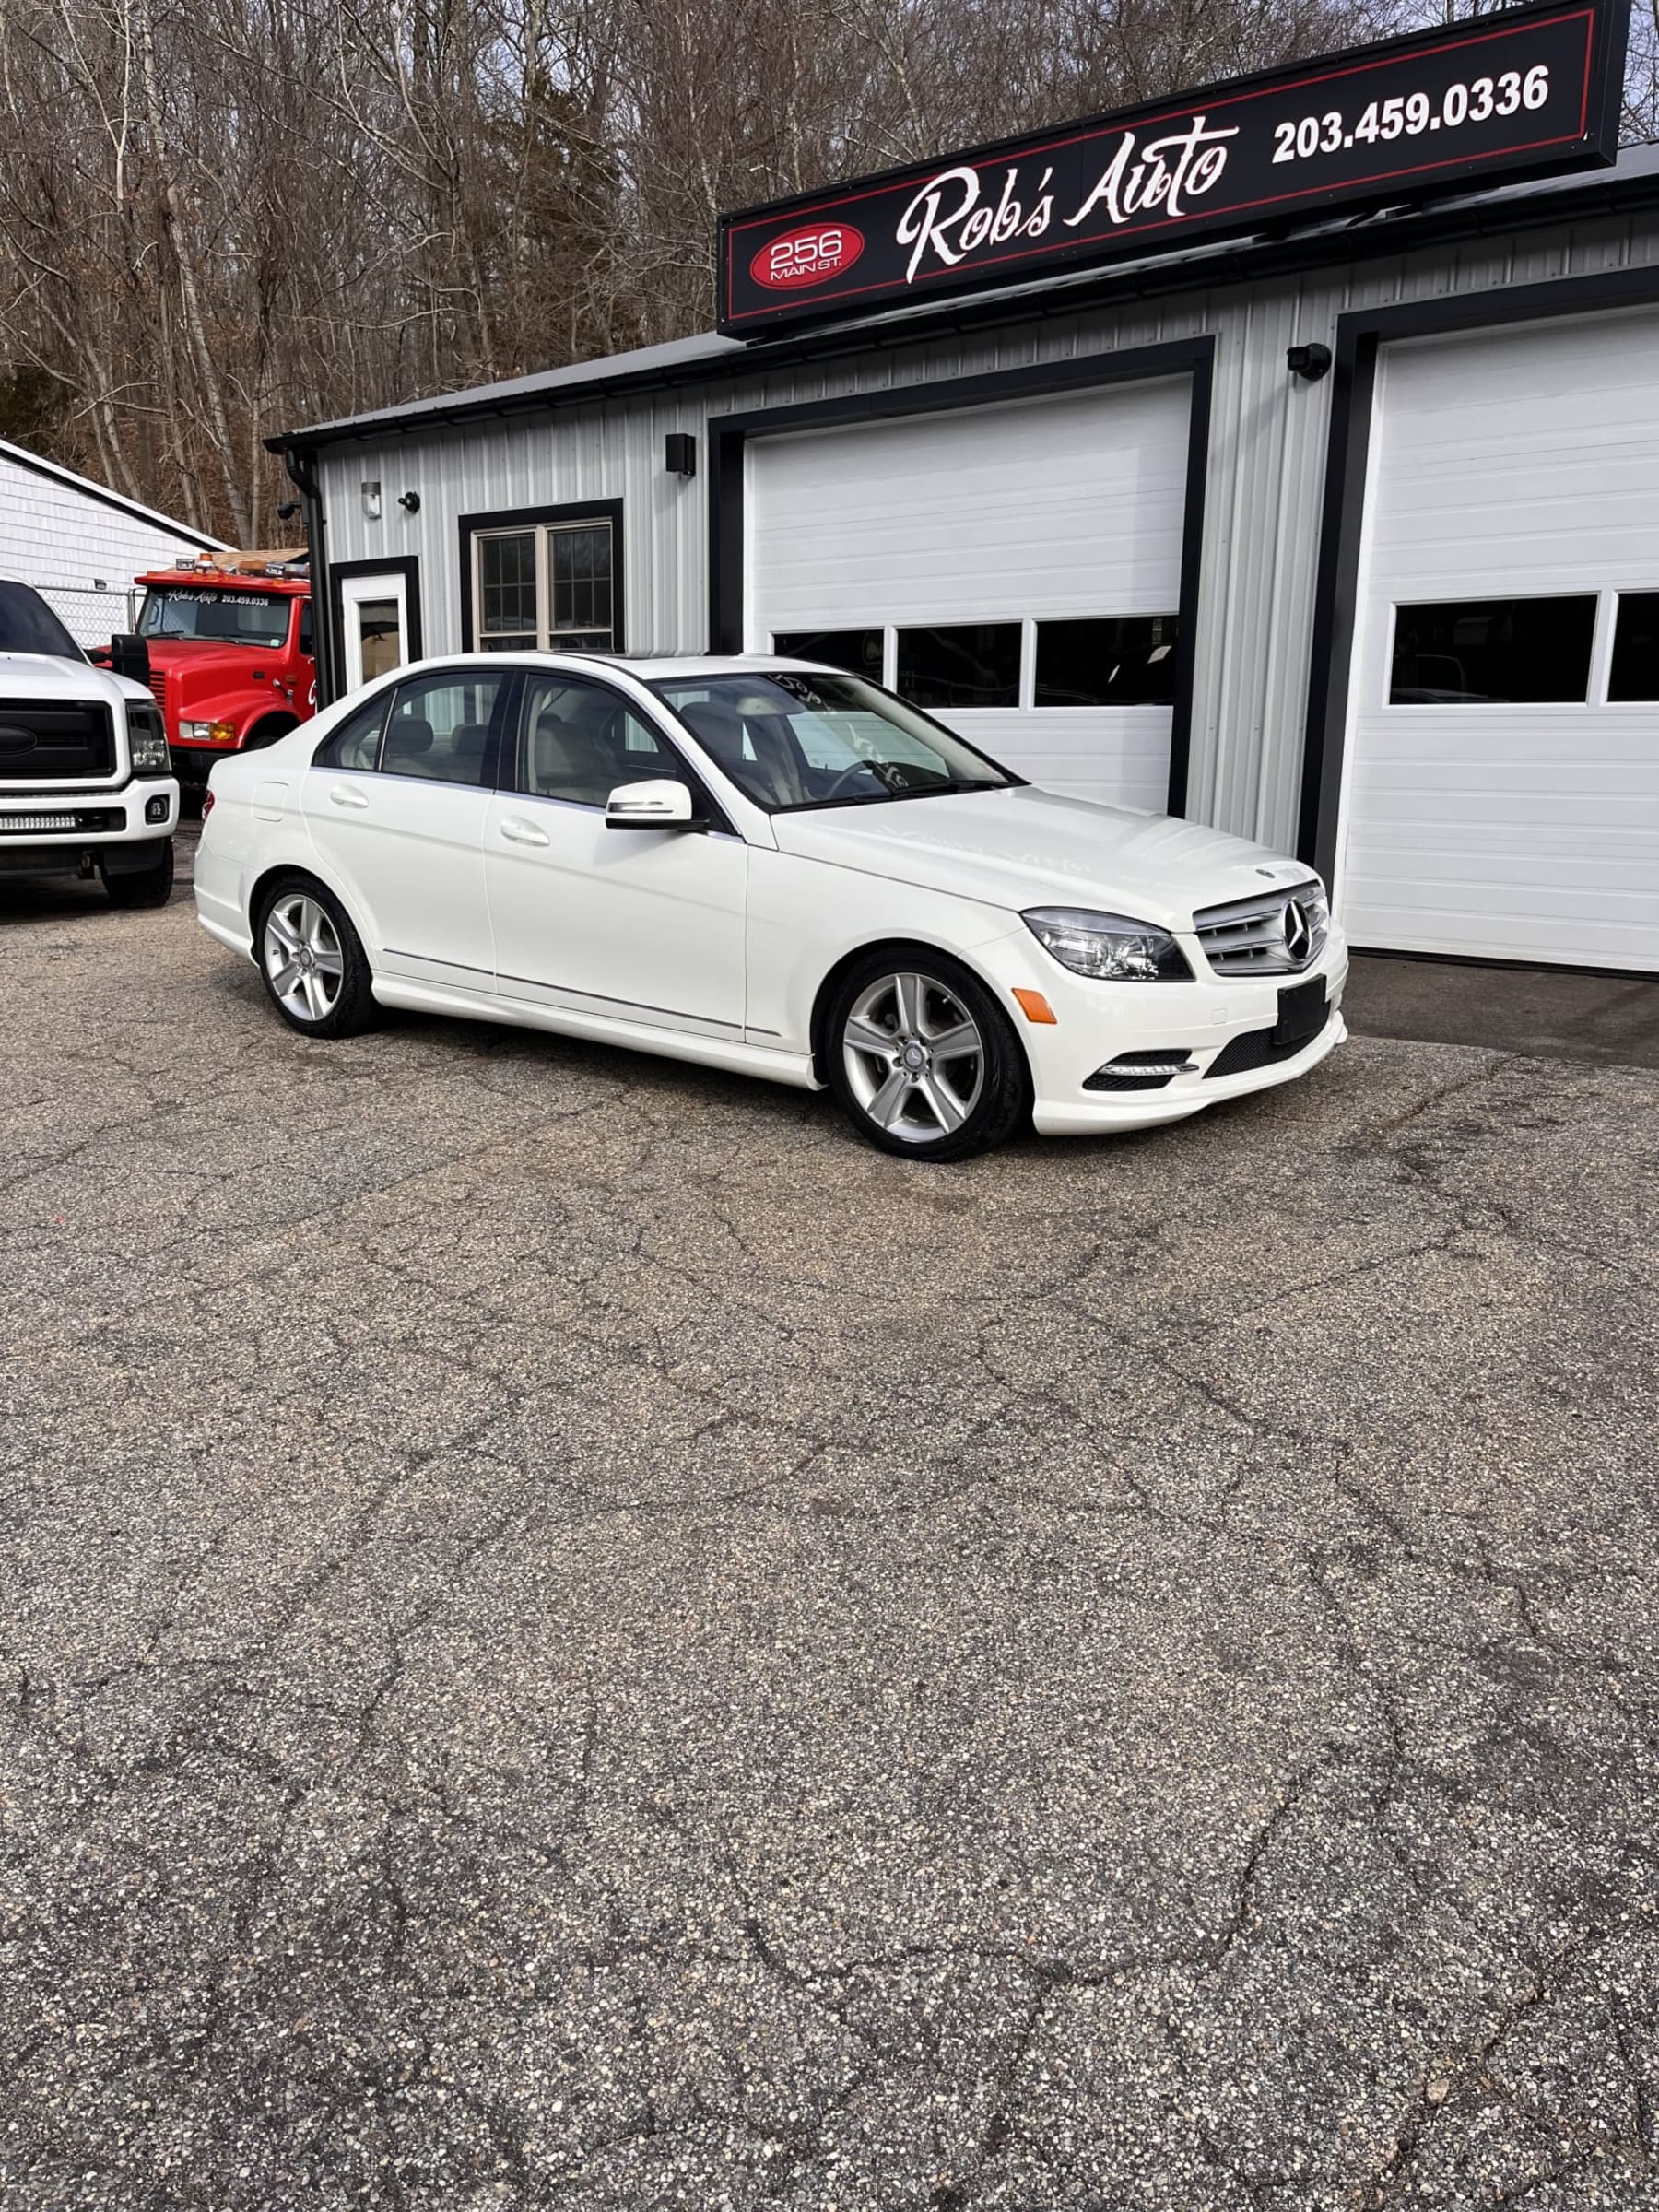 NEW ARRIVAL!! If anyone is looking for a next to new car at used car pricing this is it! One owner car! Mercedes-Benz C300 4Matic!! AWD!! Moonroof, heated leather seats, Bluetooth and much much more! ONLY 21k Miles!! Will not last at $17,900!!